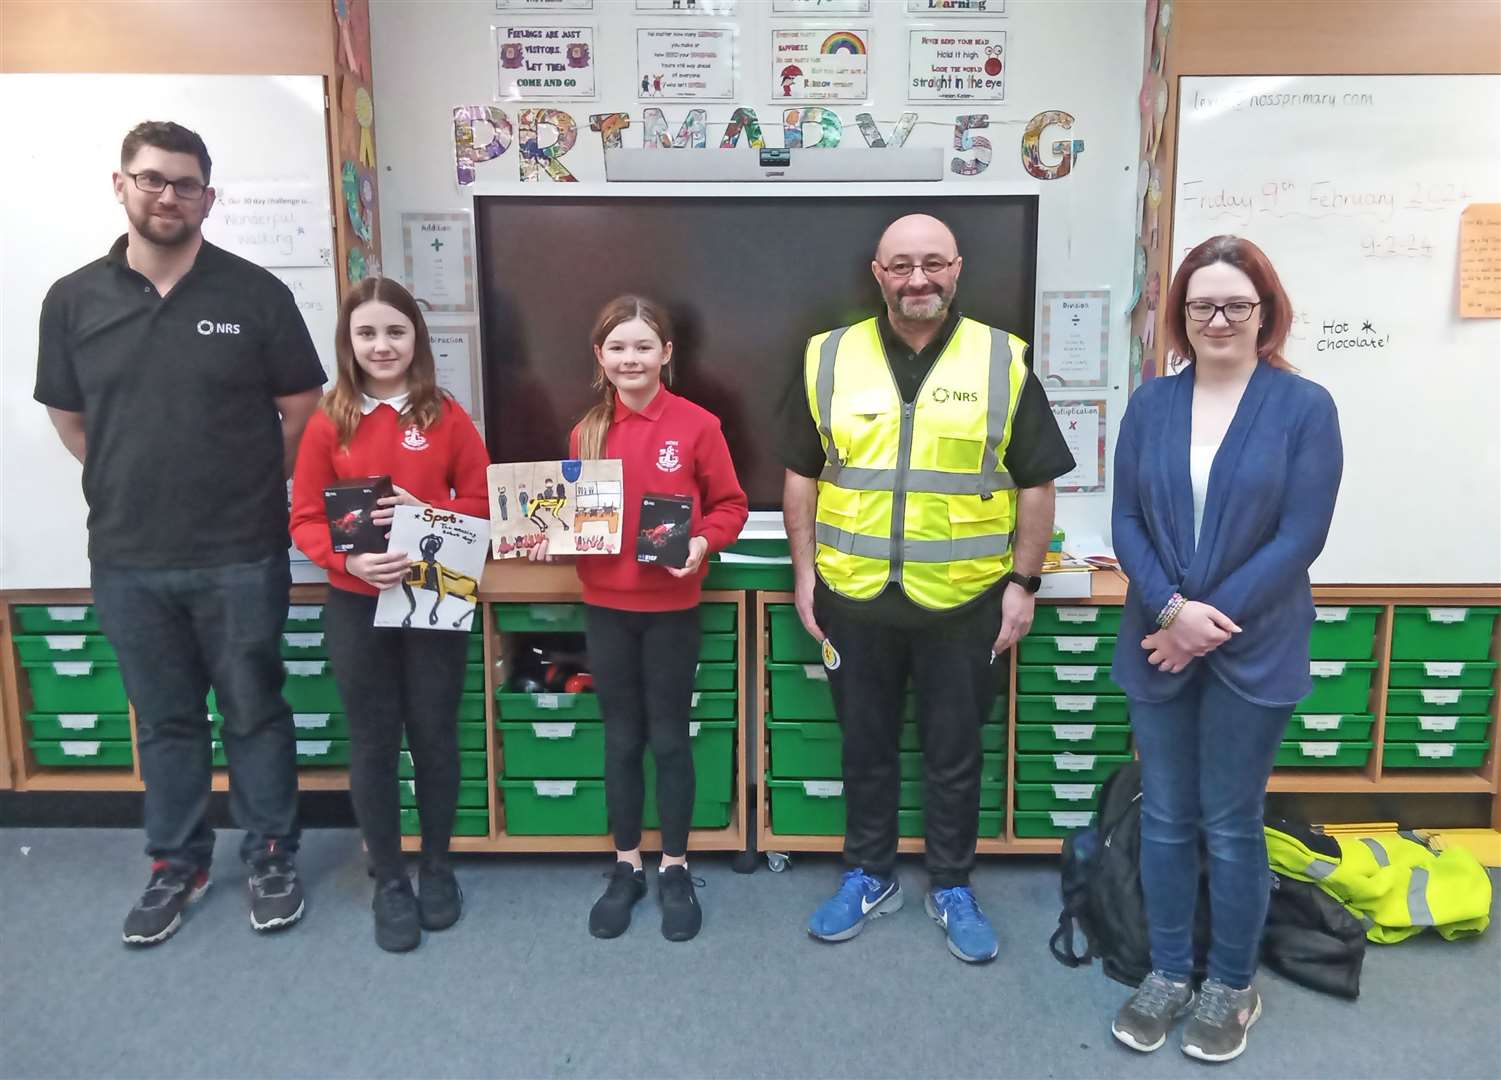 Dounreay's James Steven (left), Robert Macleod and Heather Fairweather with Noss pupils Mae Whitelaw and Leah Mackay who were joint winners of the competition.